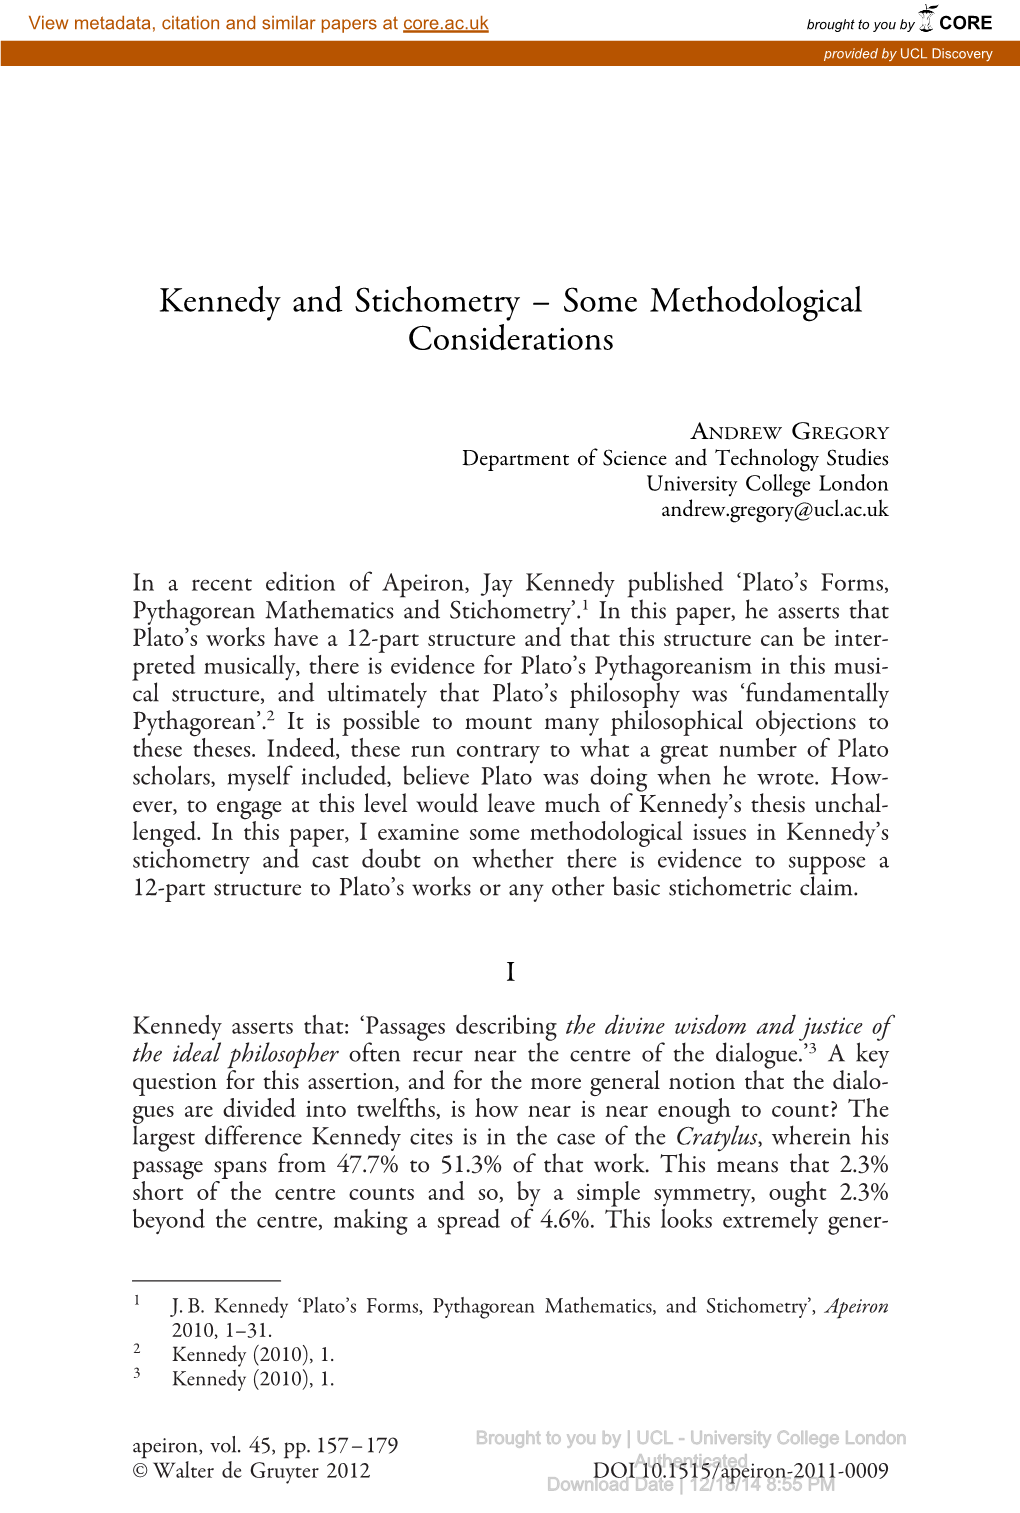 Kennedy and Stichometry – Some Methodological Considerations